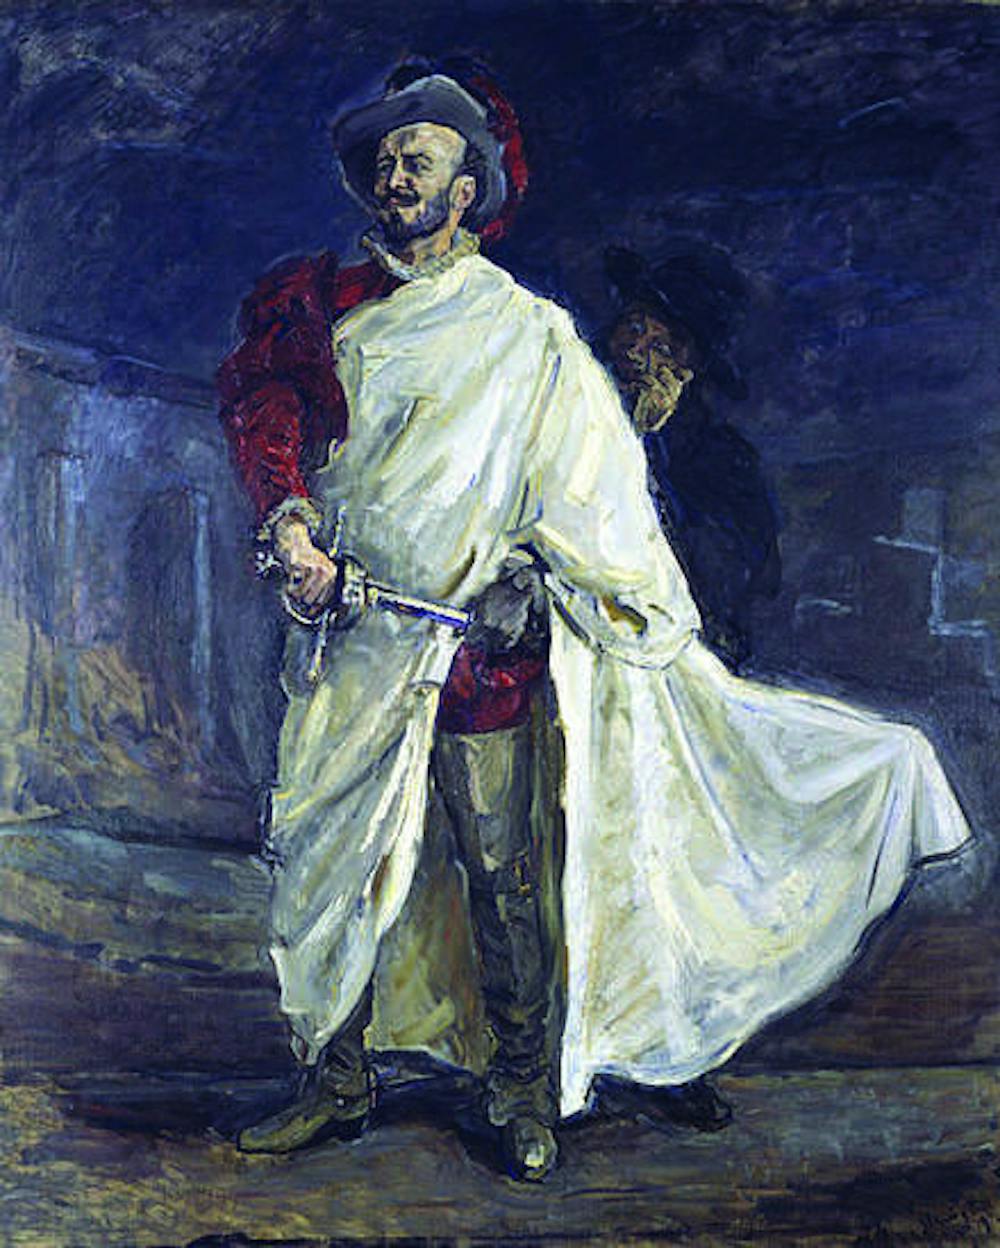 Portrait of Francisco D'Andrade in the title role of Don Giovanni by Max Slevogt, 1912